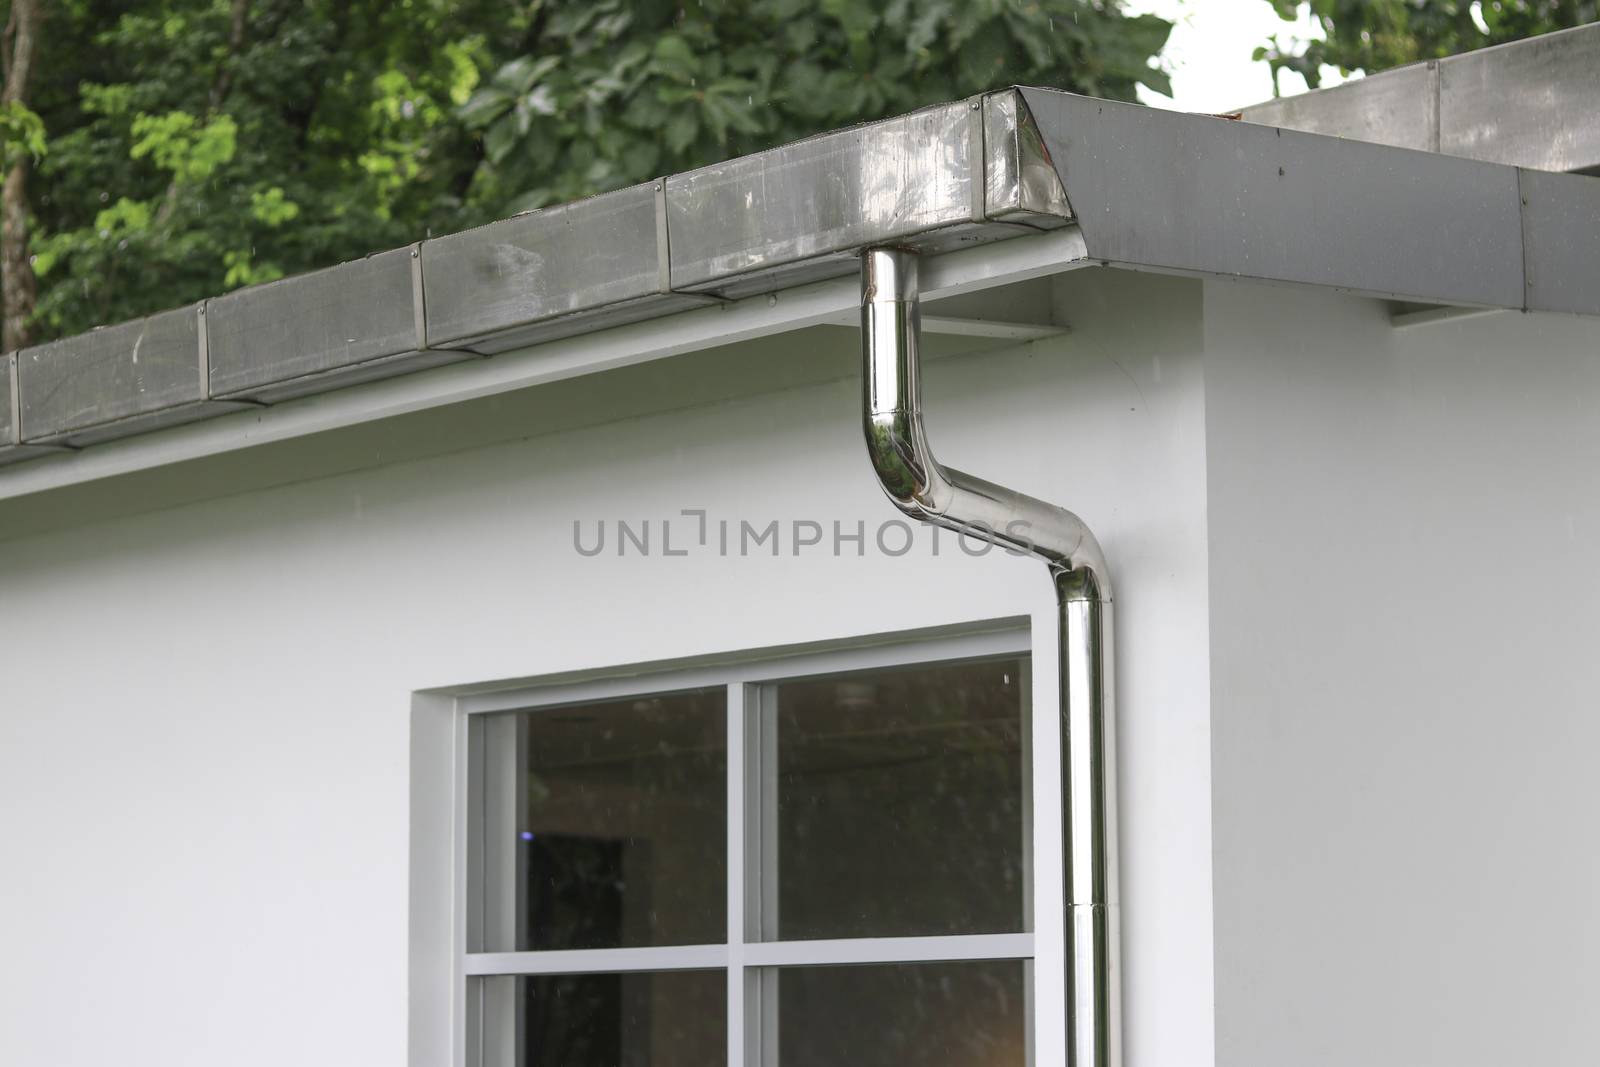 Rain gutters and pipes for drainage of rainwater from the roof.